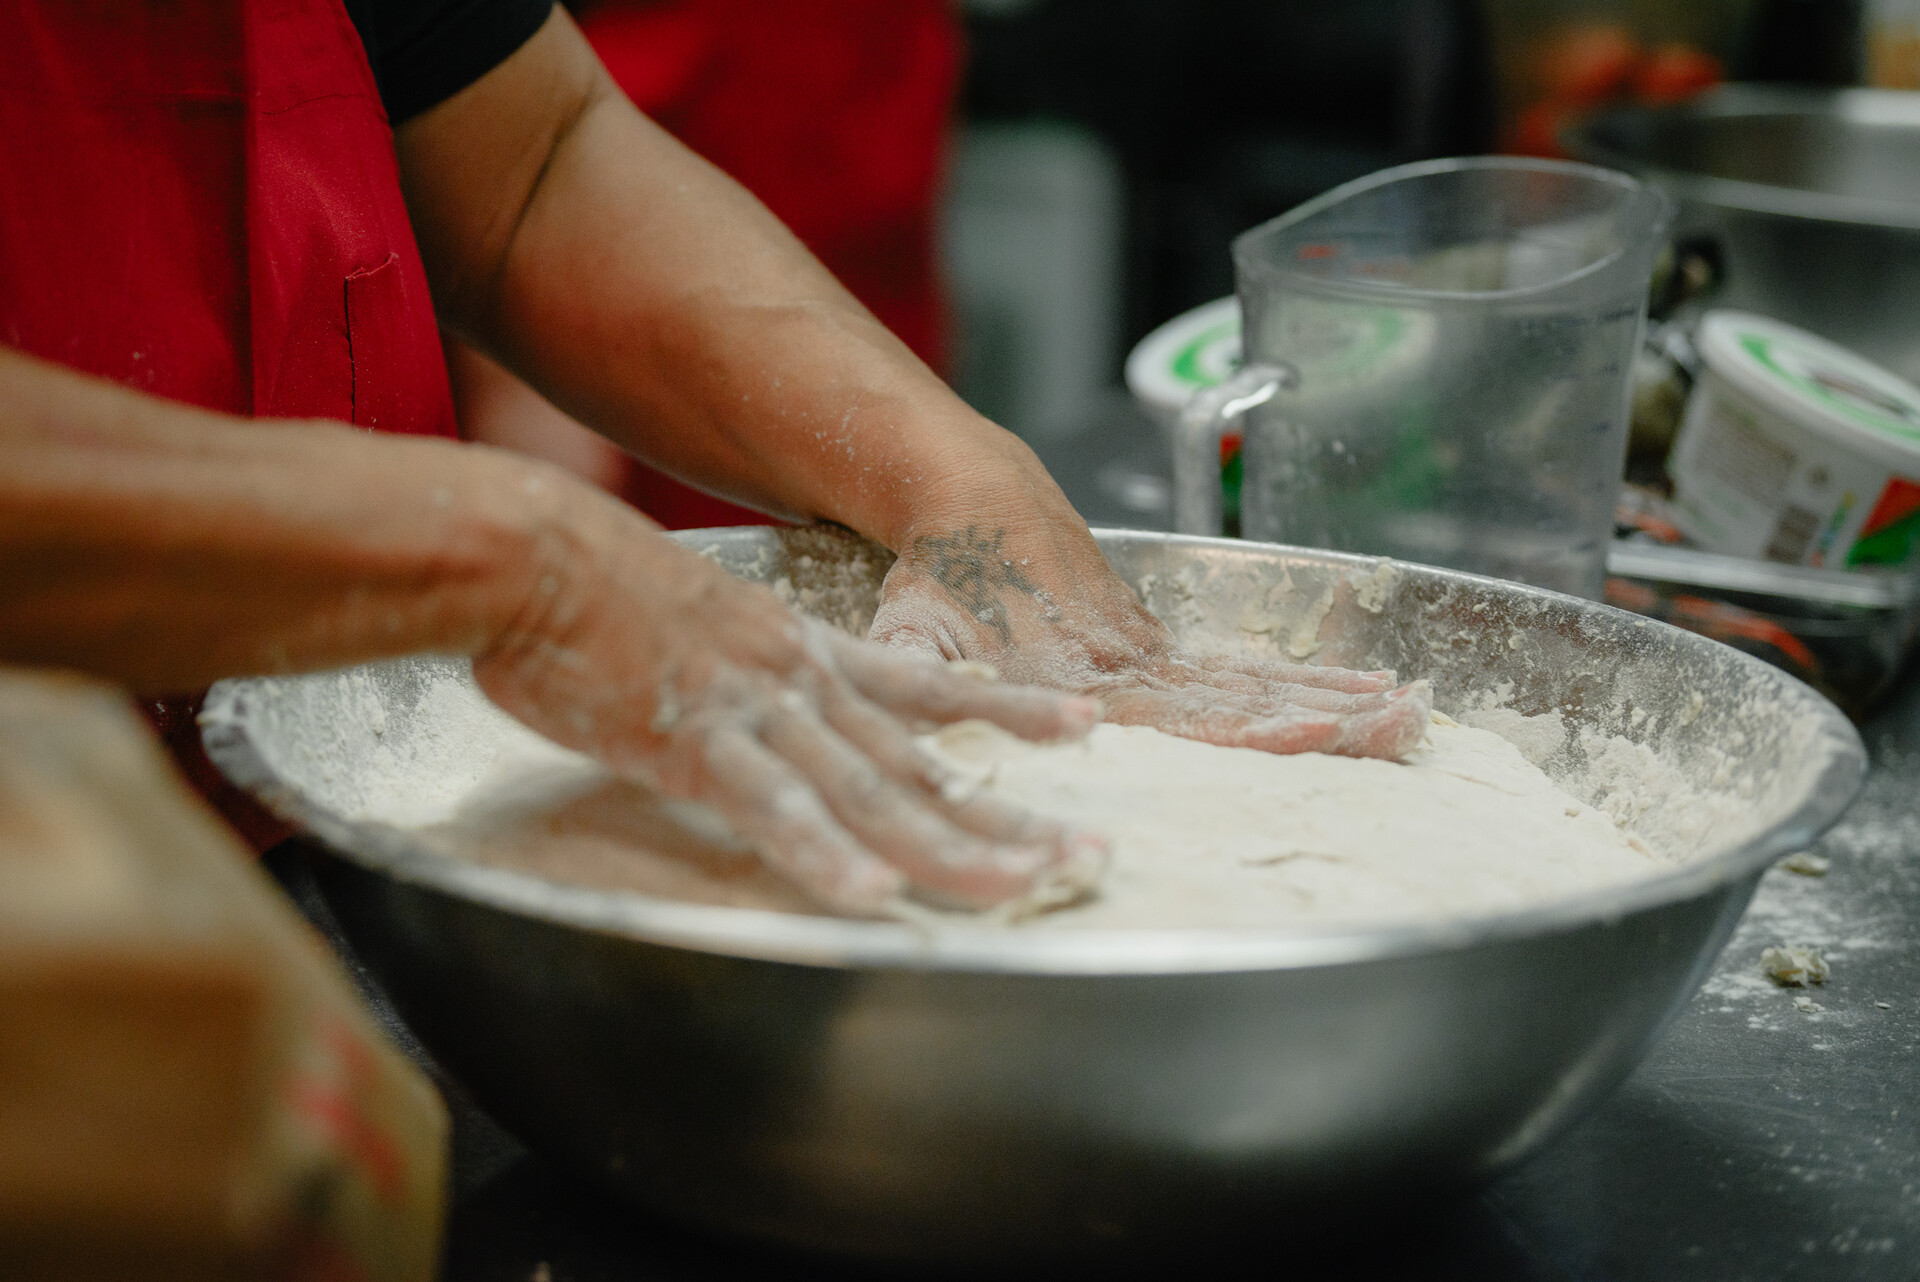 A close-up shot of hands kneading dough in a large, metal bowl. Flour is dusted all over the countertop.